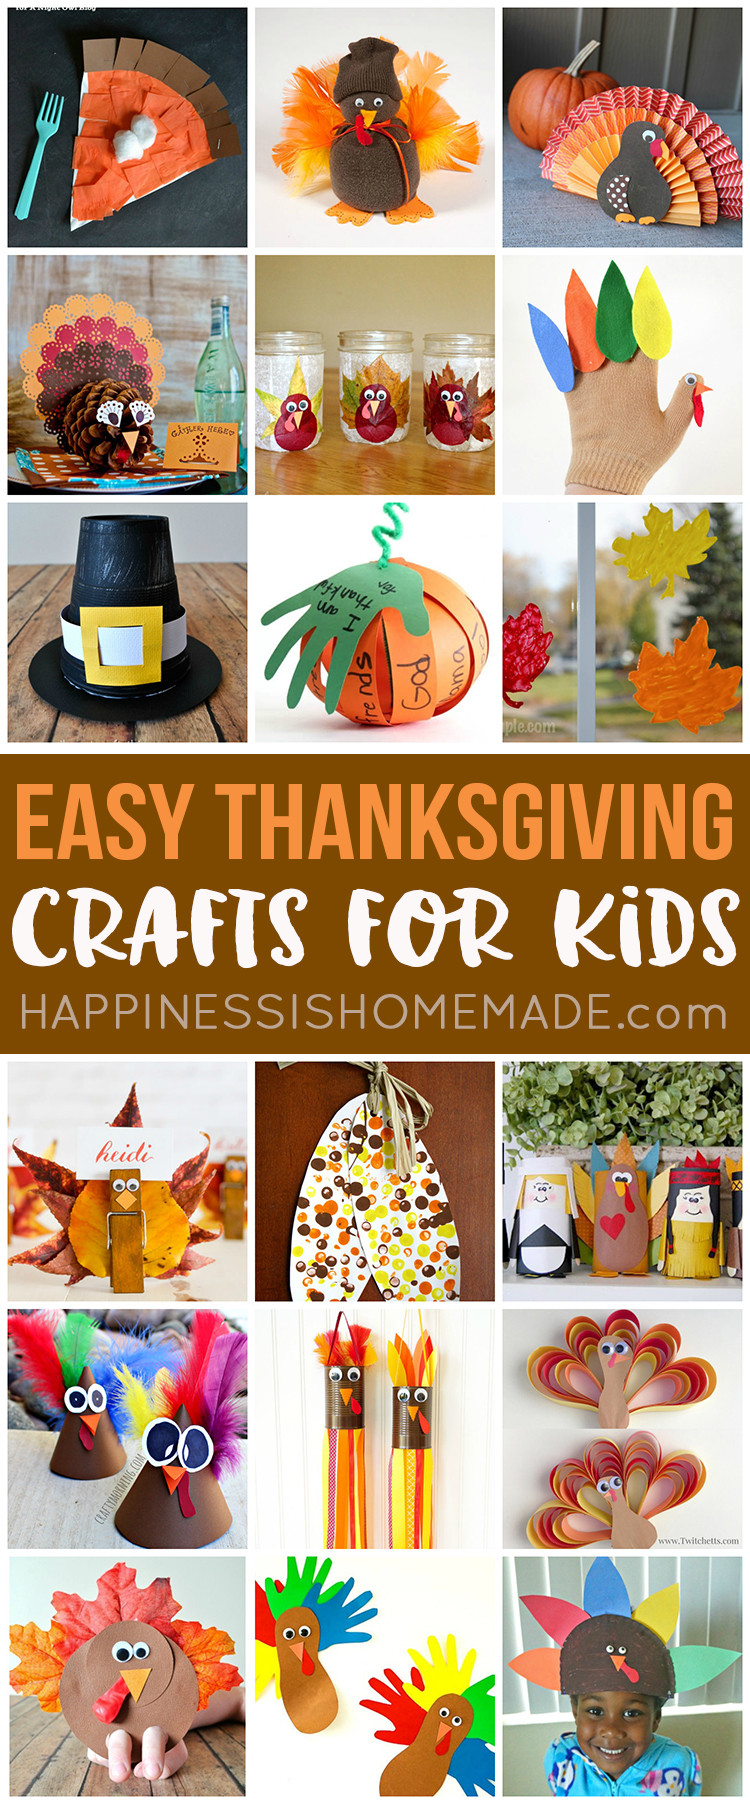 Easy Toddler Crafts
 Easy Thanksgiving Crafts for Kids to Make Happiness is